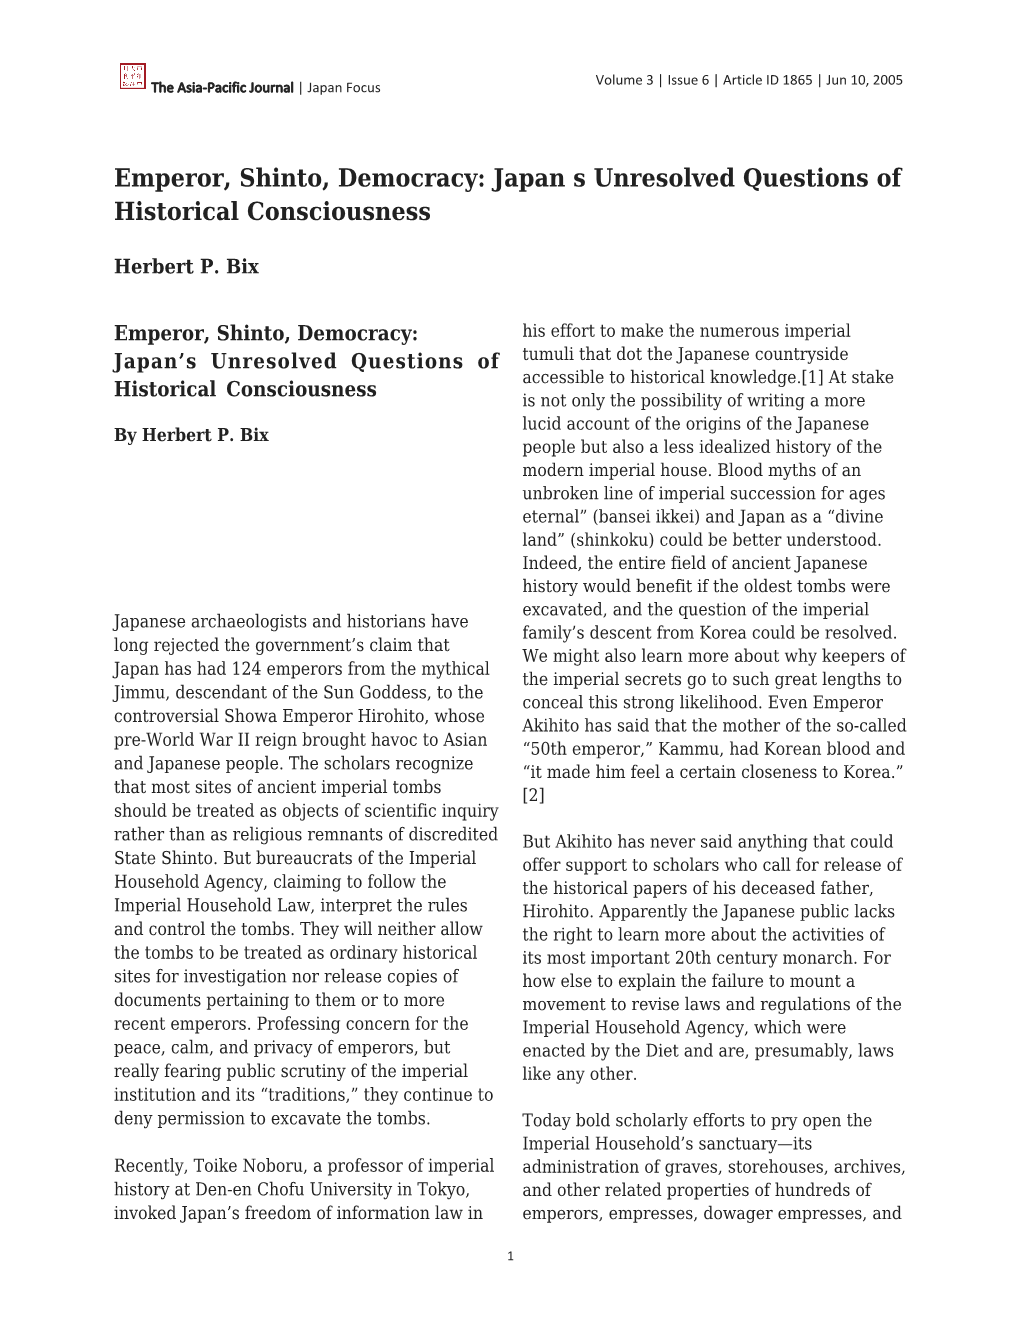 Emperor, Shinto, Democracy: Japan S Unresolved Questions of Historical Consciousness